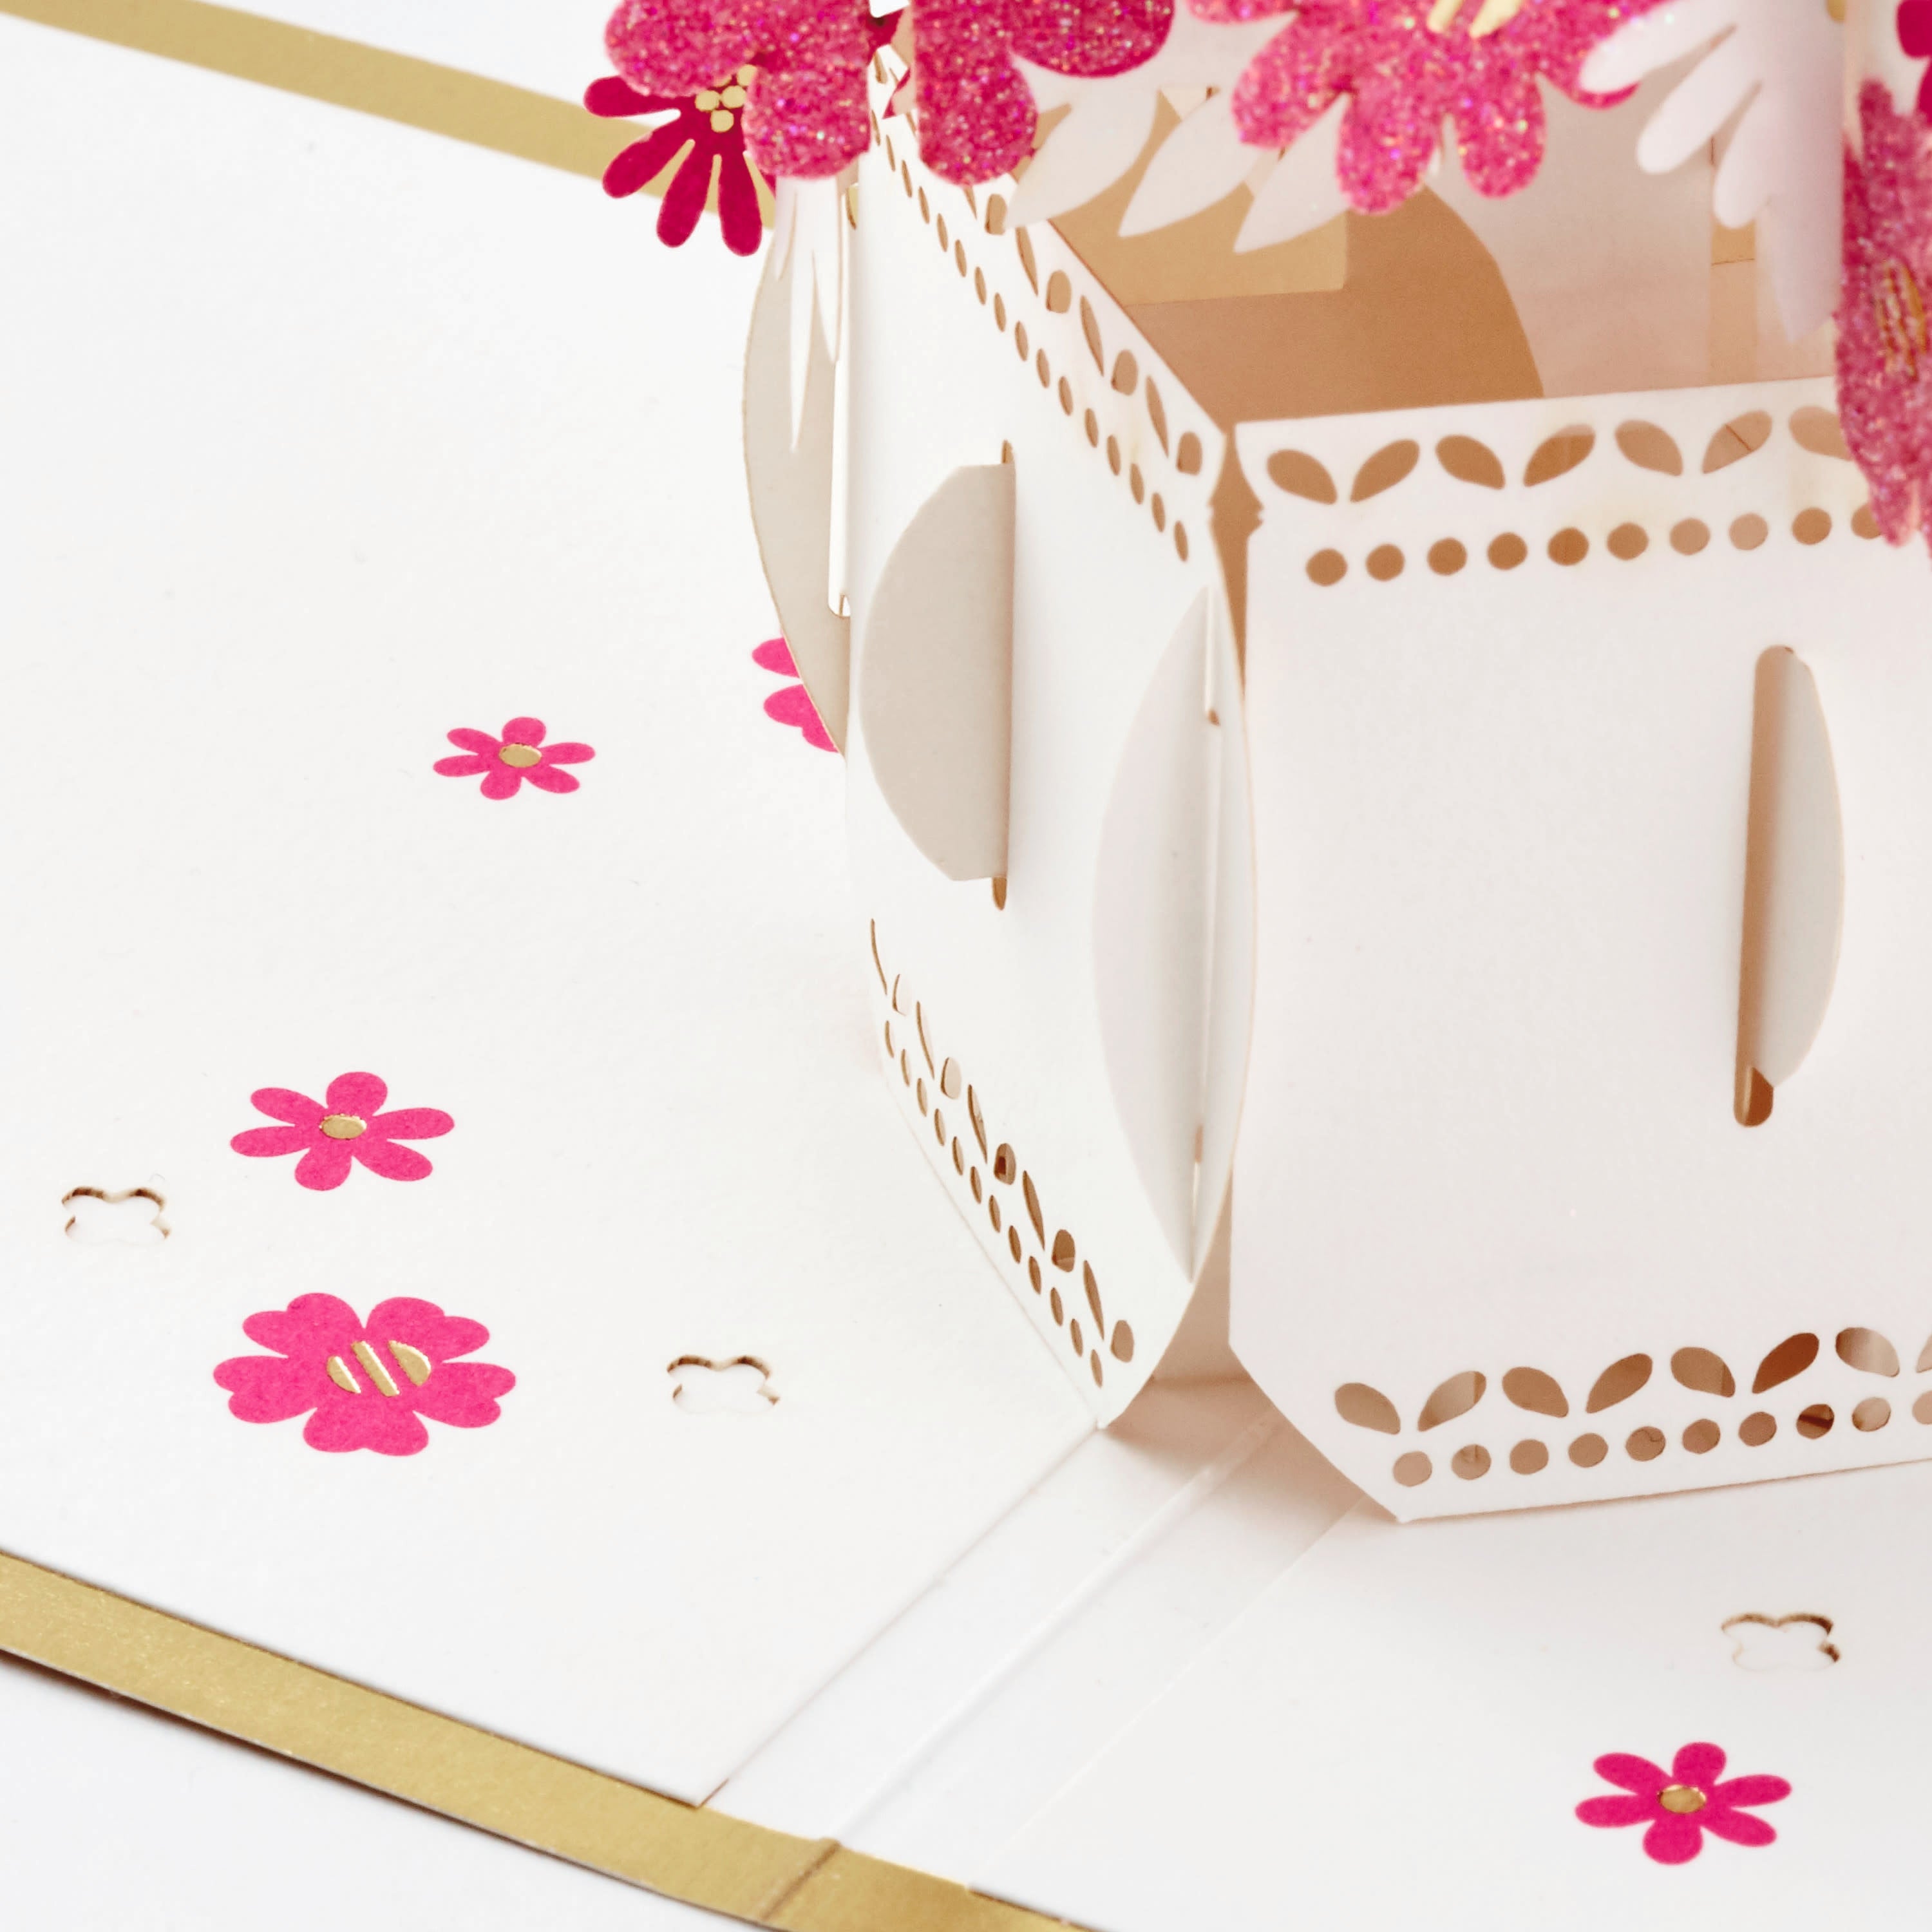 Hallmark Signature Paper Wonder Pop Up Mothers Day Card (Flowers in Vase, Make the World More Beautiful)